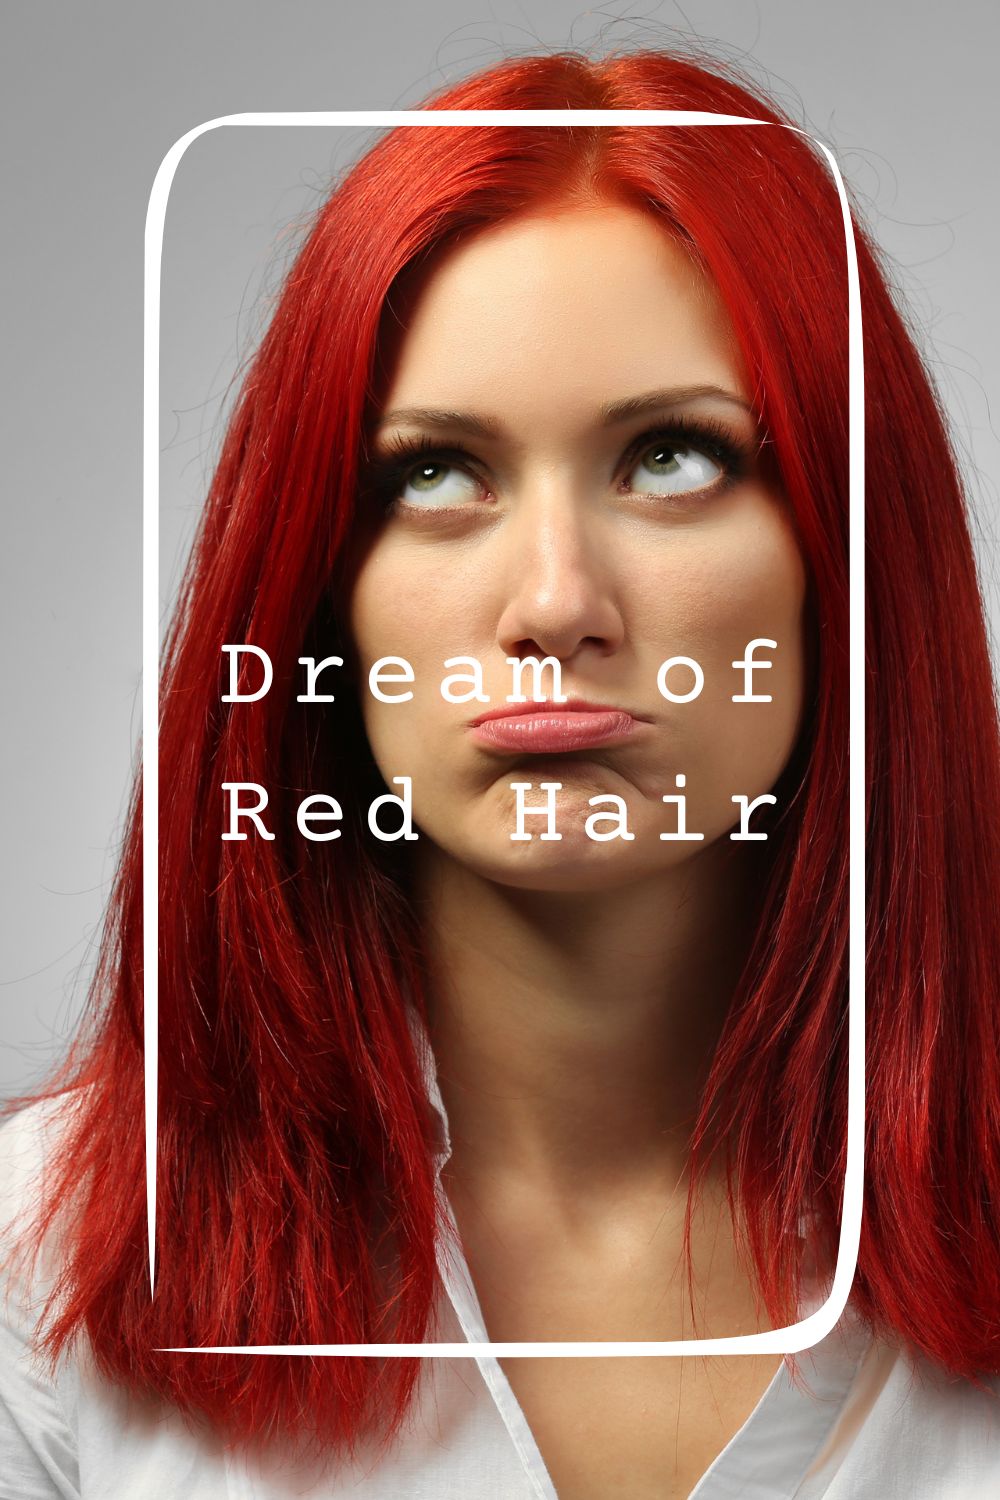 5 Dream of Red Hair Meanings4